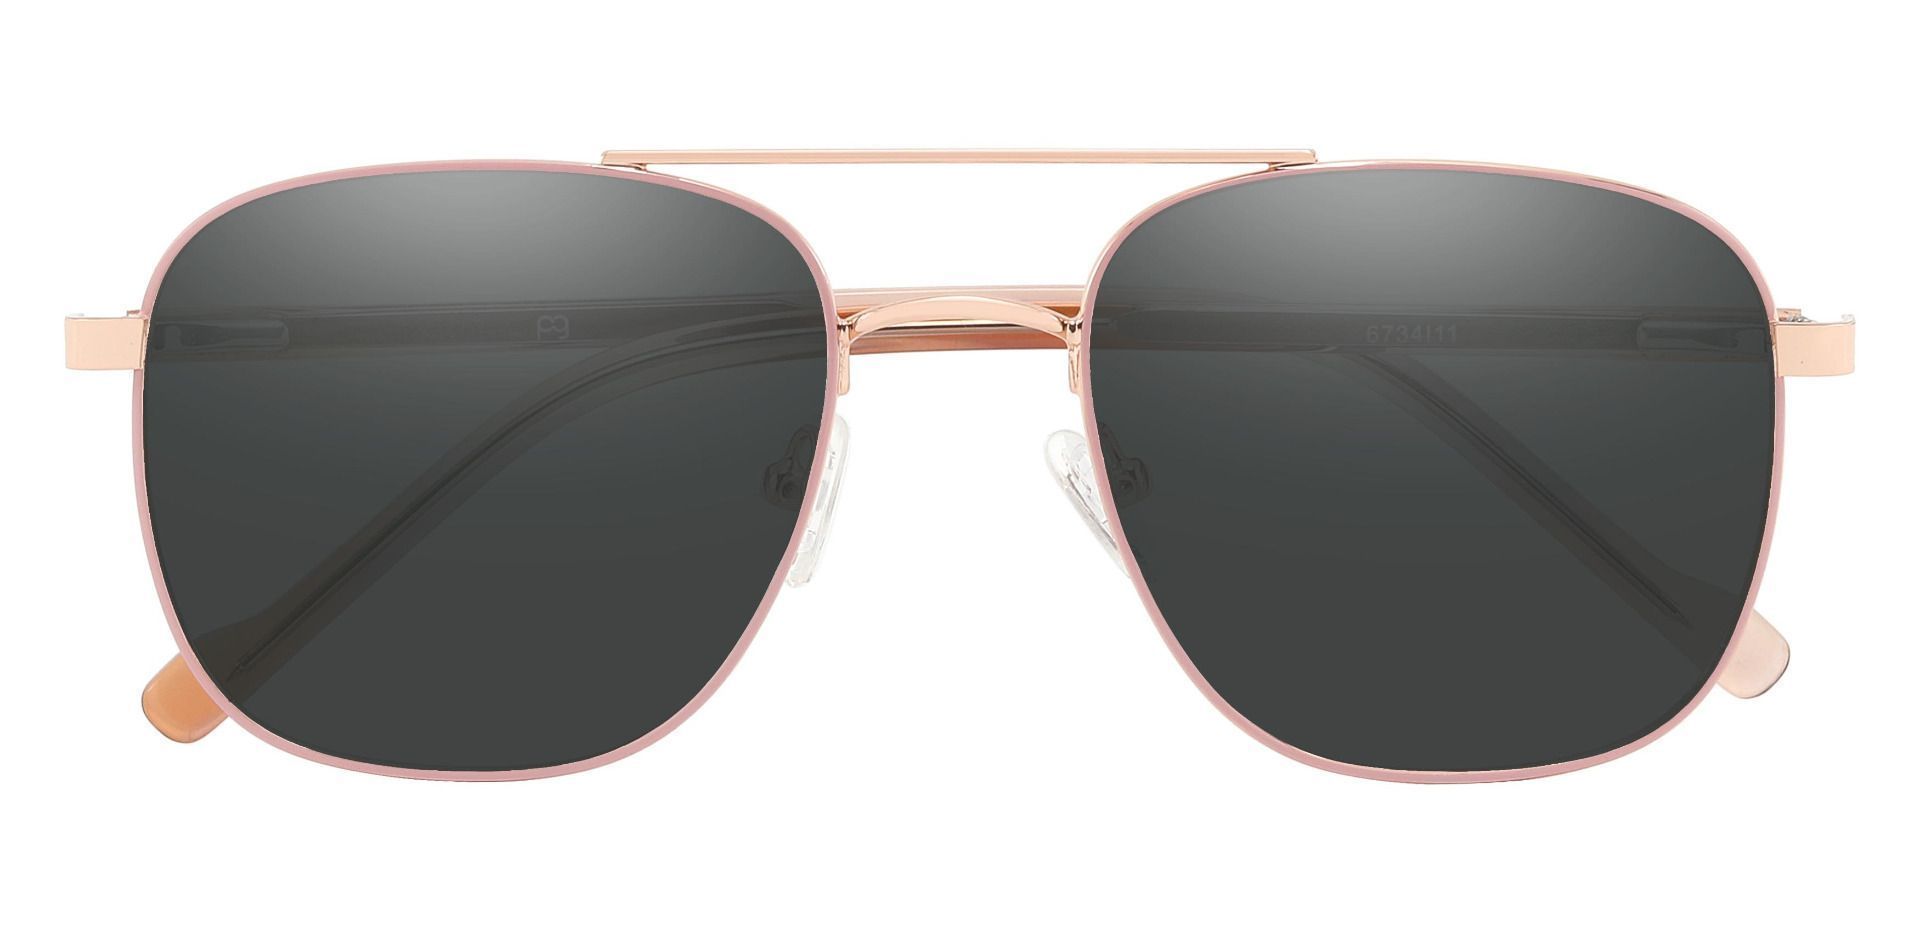 Howell Aviator Non-Rx Sunglasses - Pink Frame With Gray Lenses